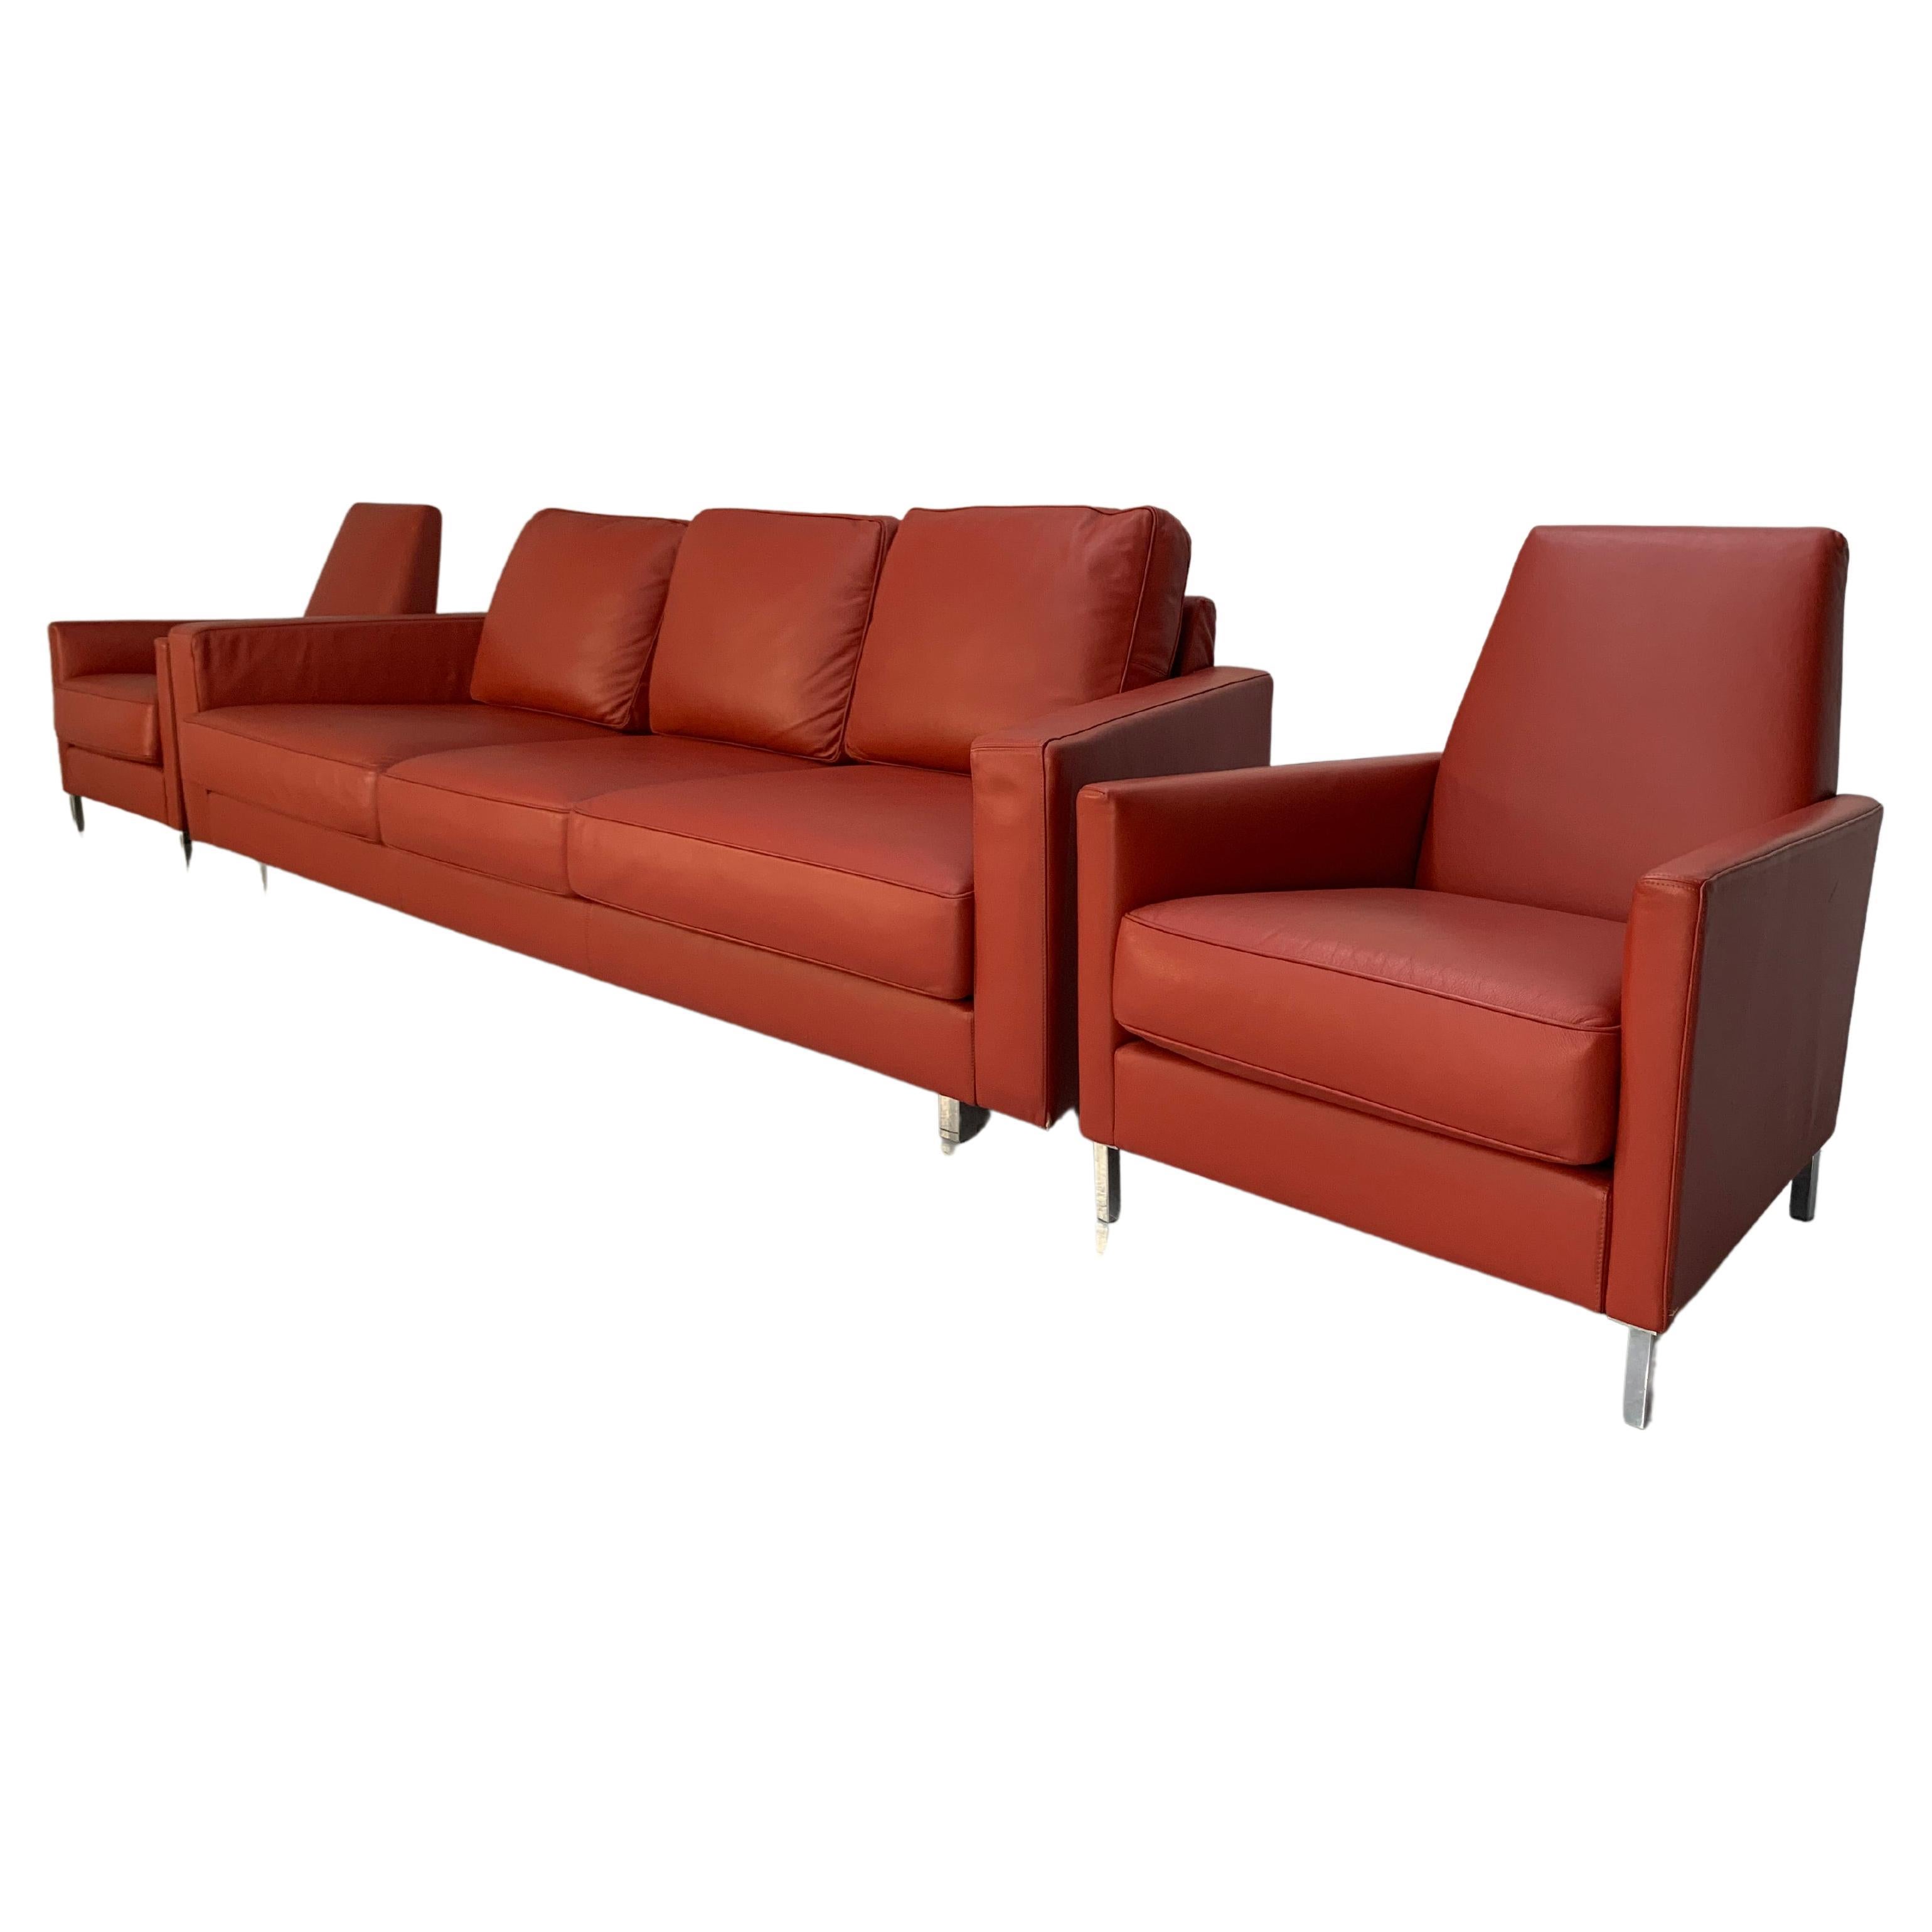 Moroso Hyde Park Sofa & 2 Armchair Suite, in Red Pelle Leather